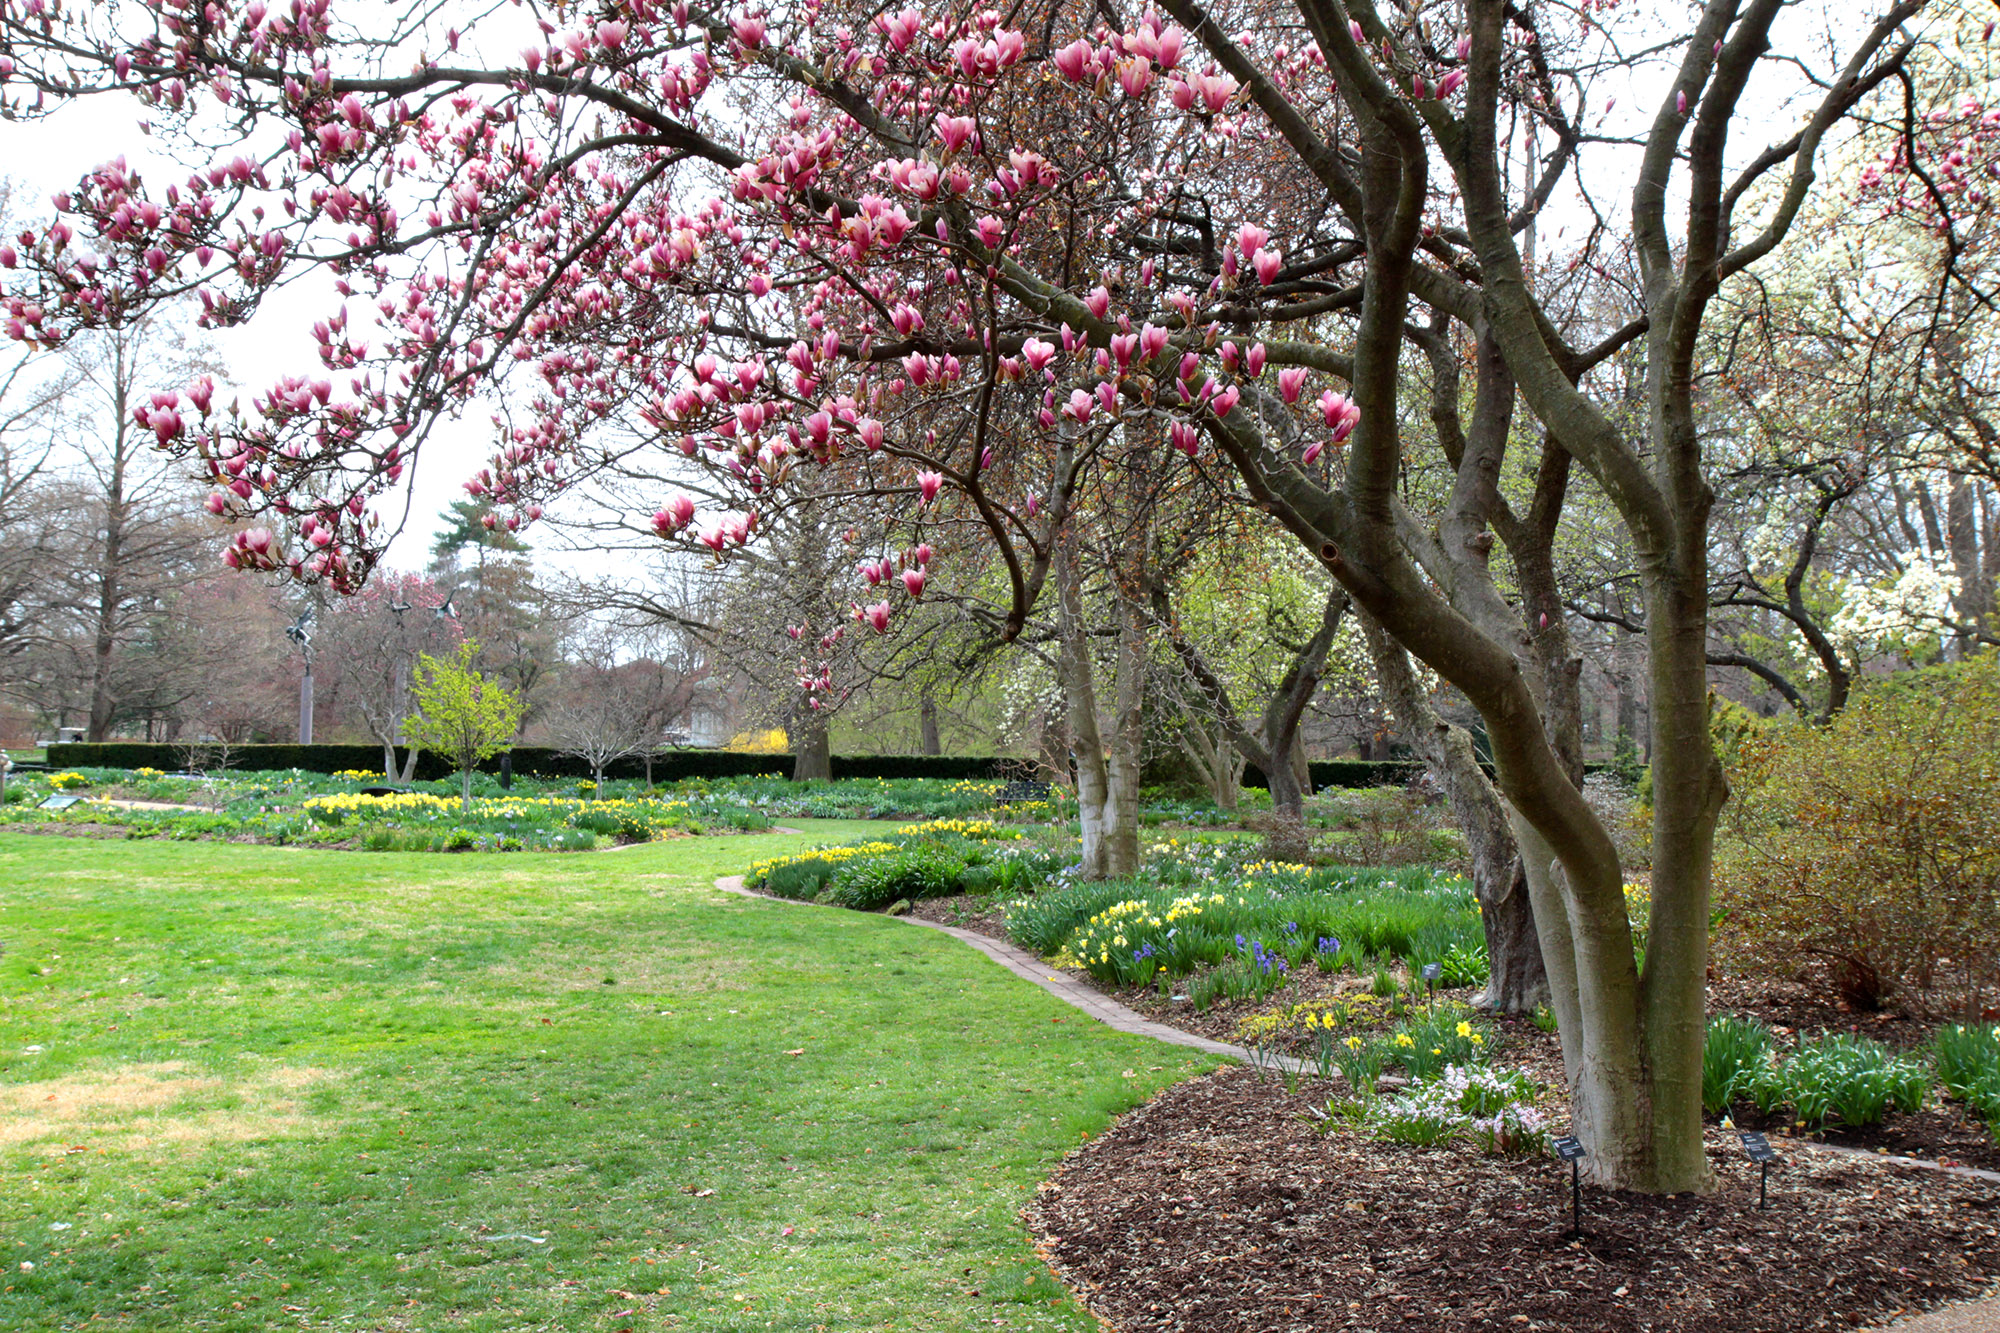 view of garden with magnolia trees and bulbs in bloom